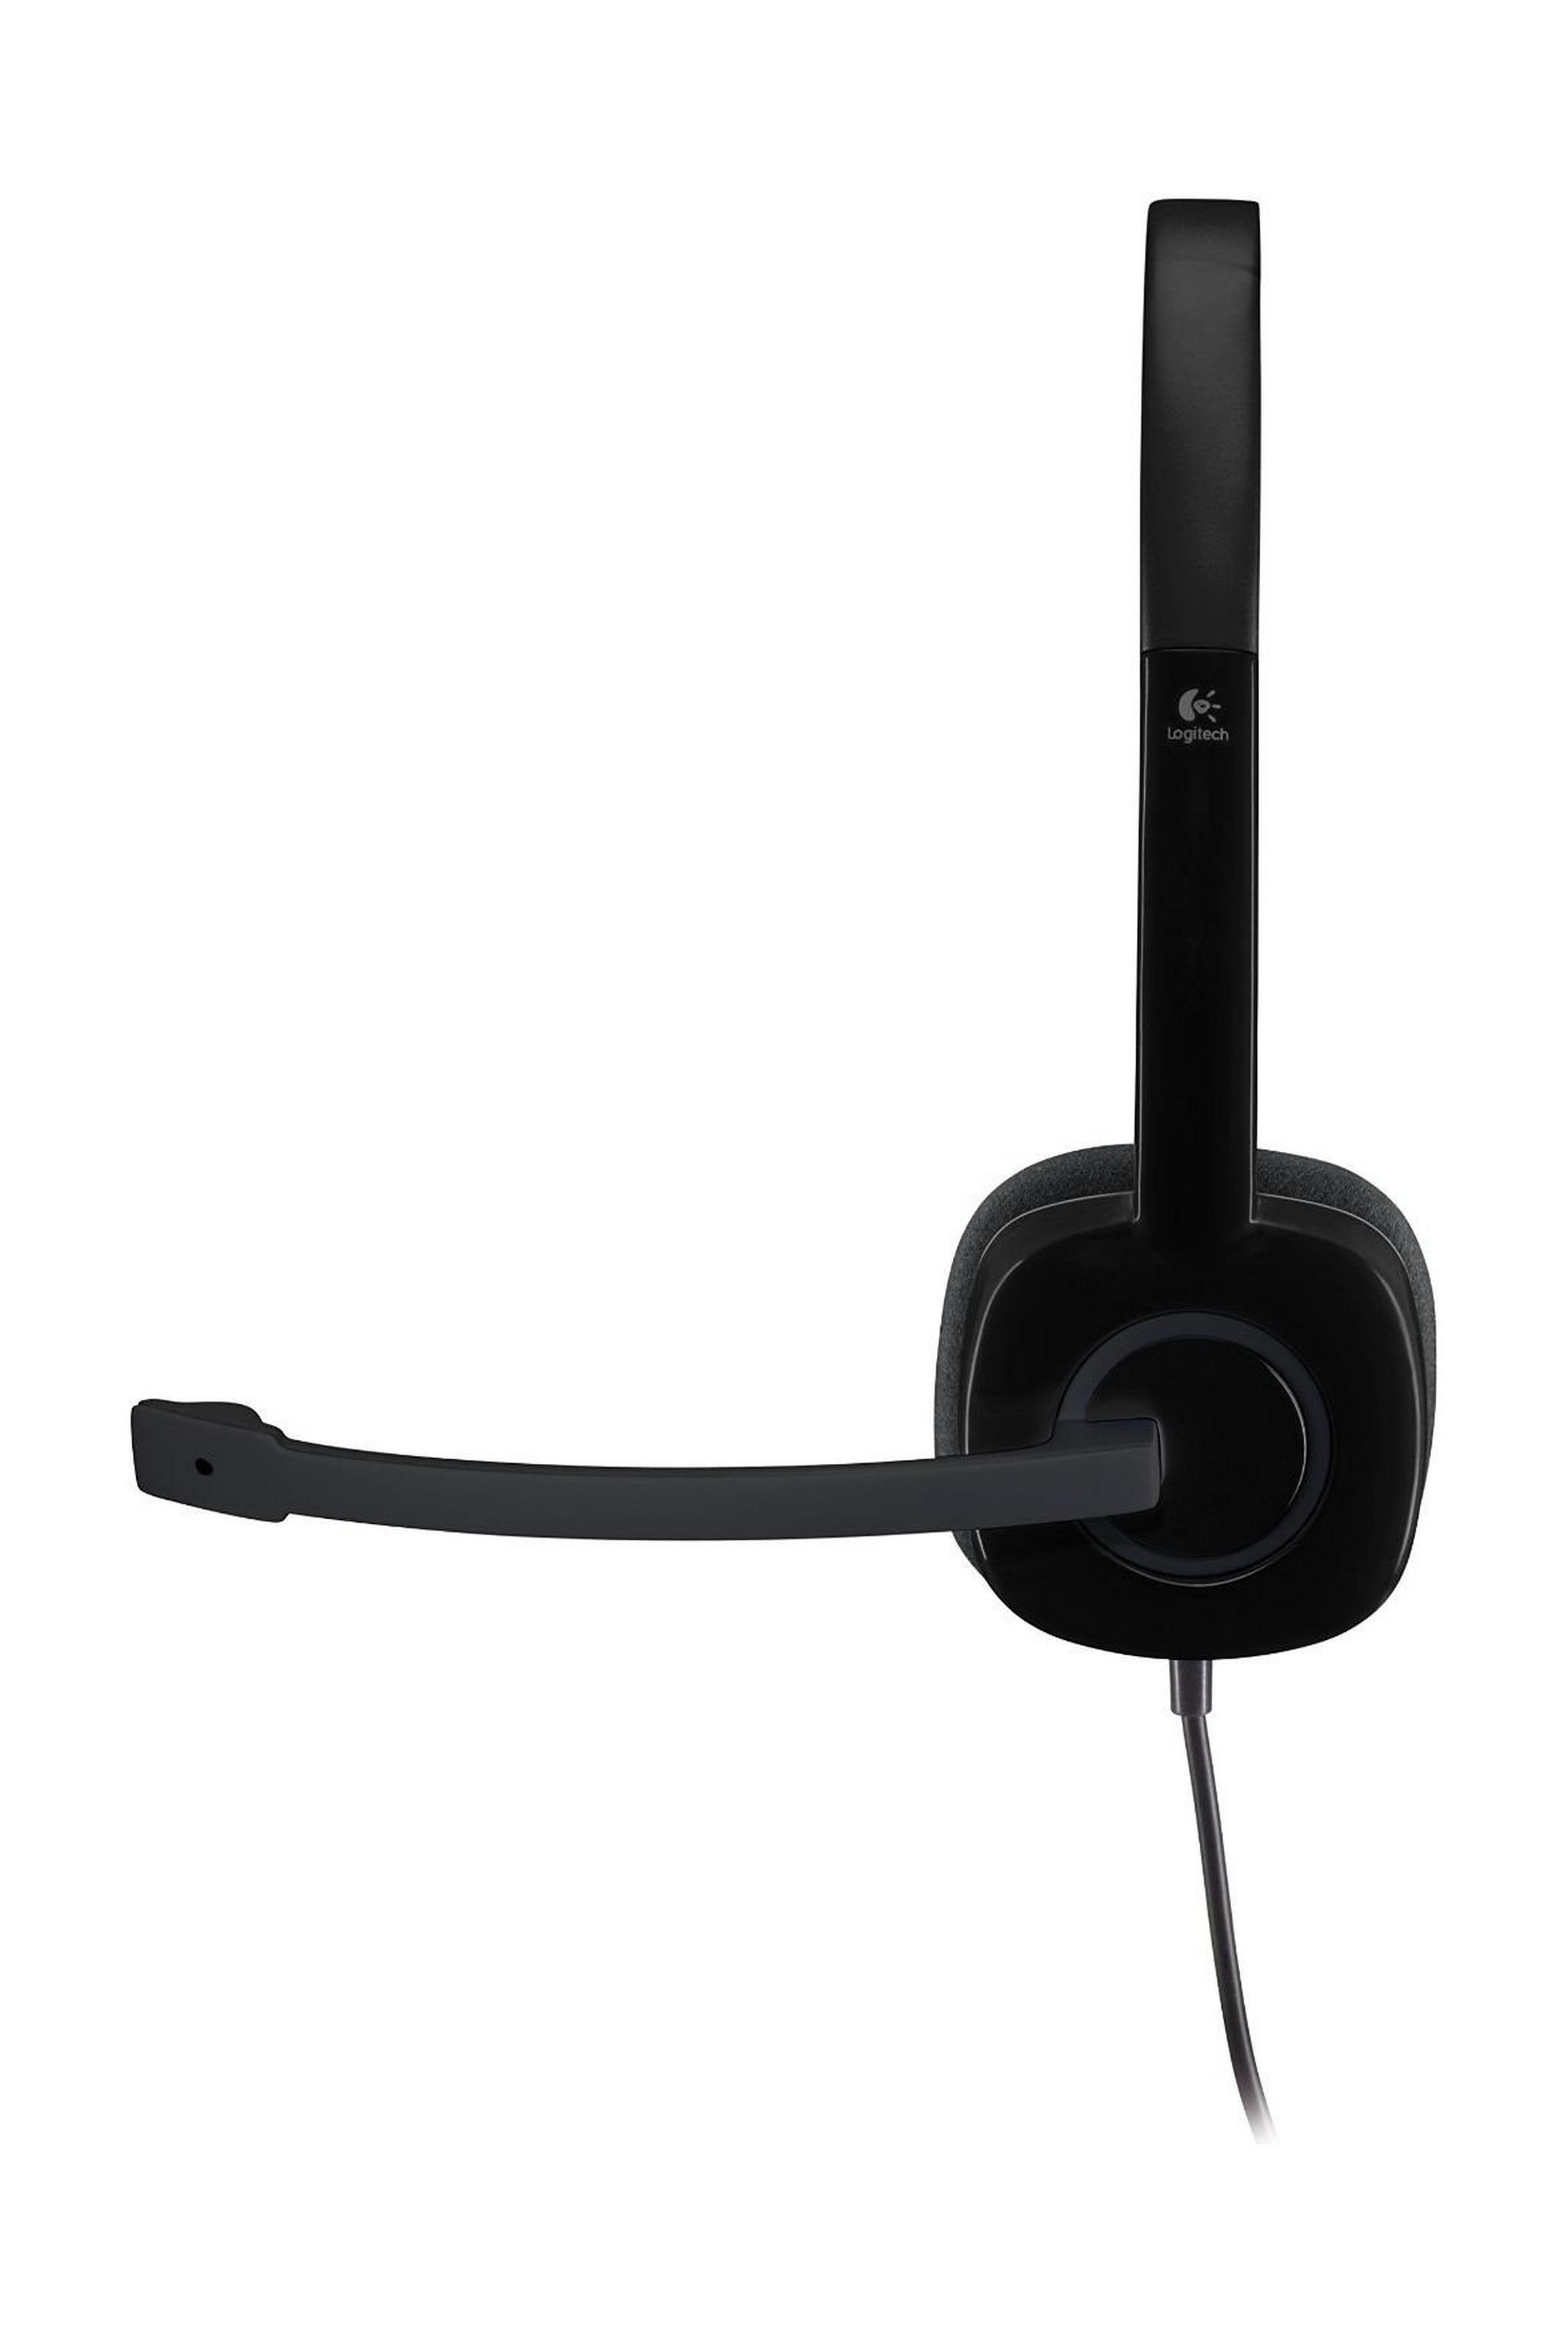 Logitech 3.5mm Analog Stereo Headset with Boom Microphone (LOG-H151)